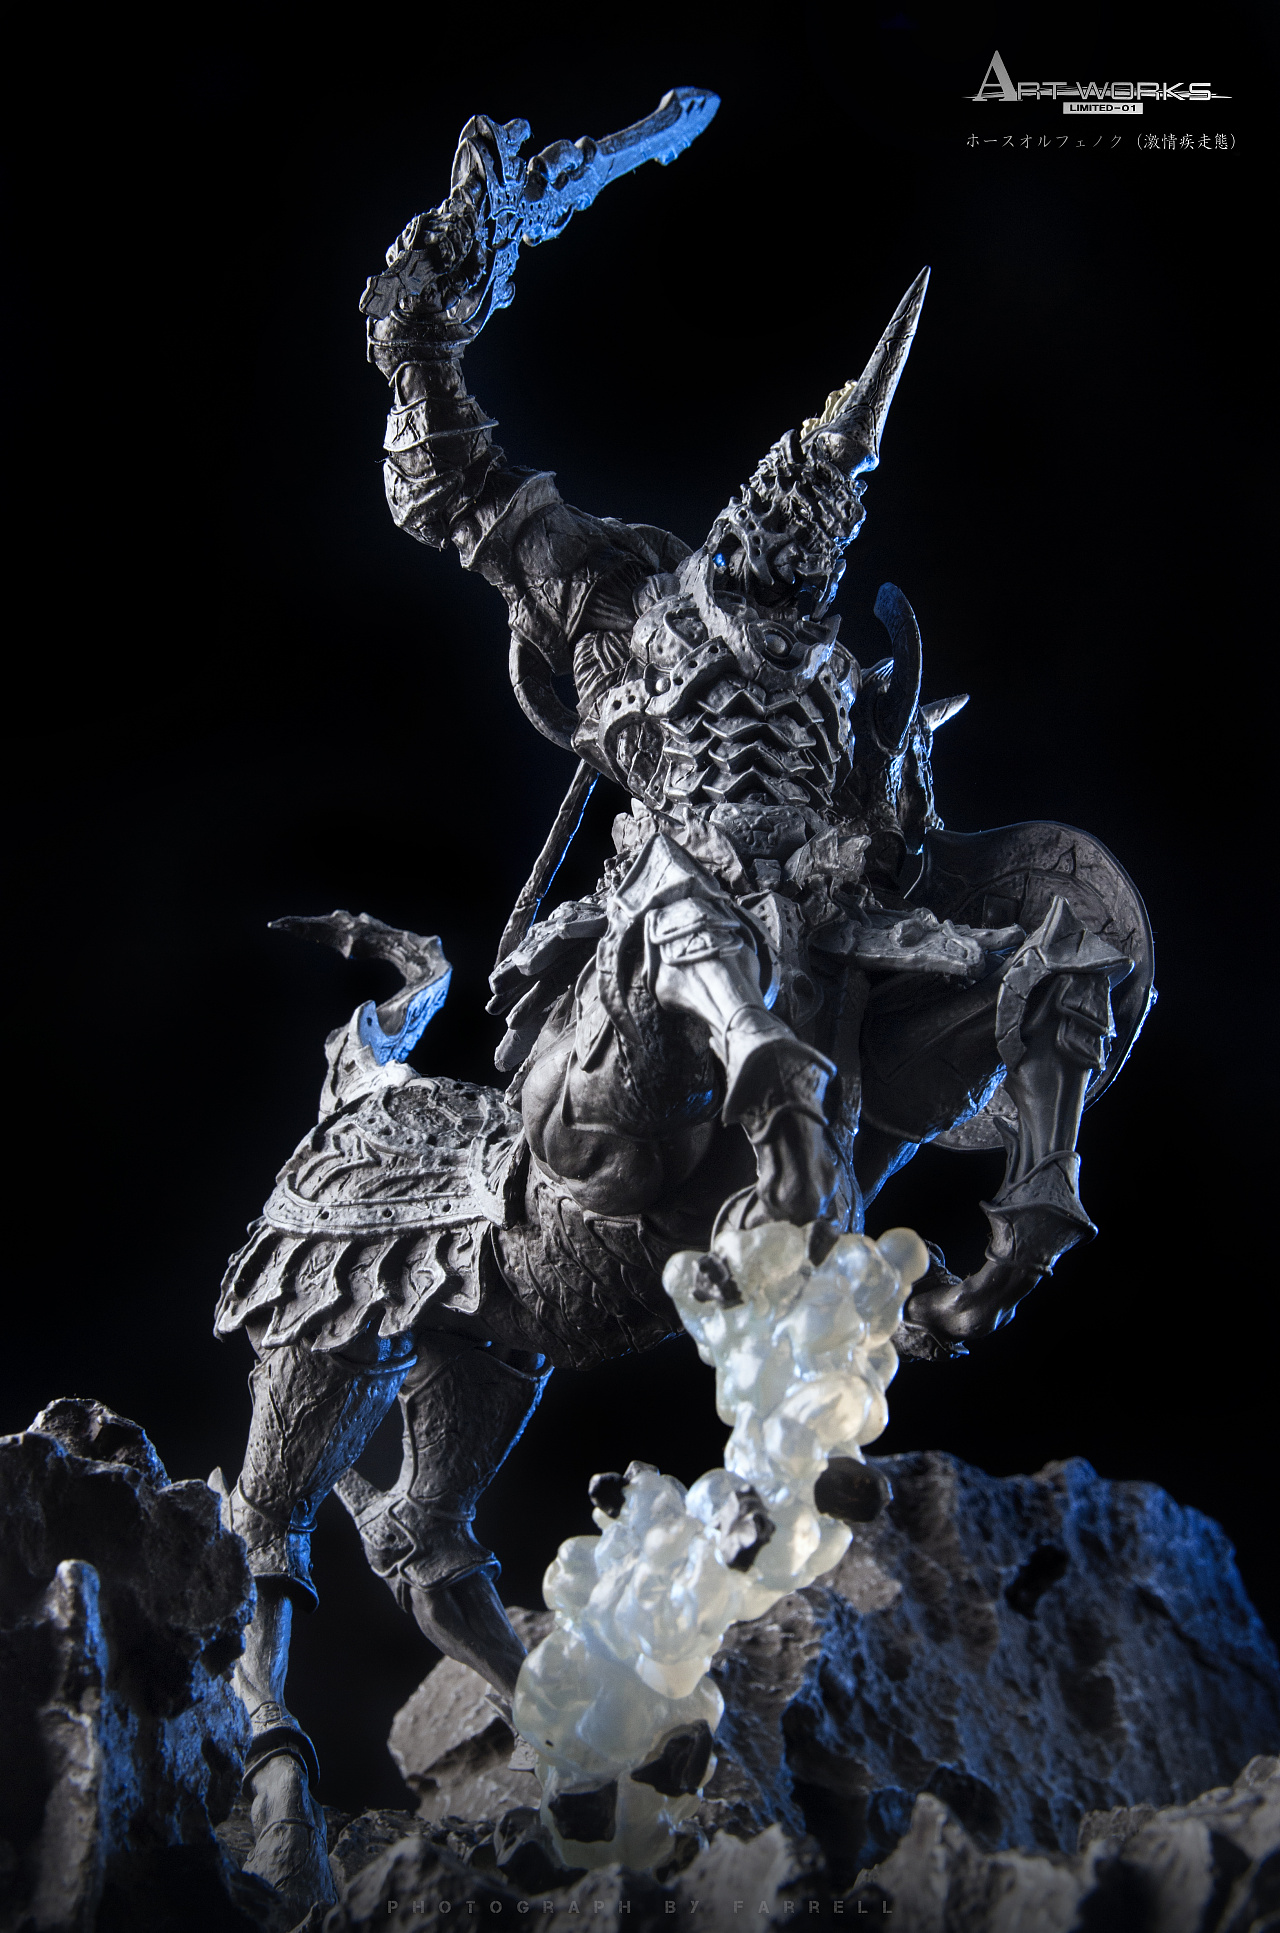 megahouse art works monsters 555人马-激情疾走态